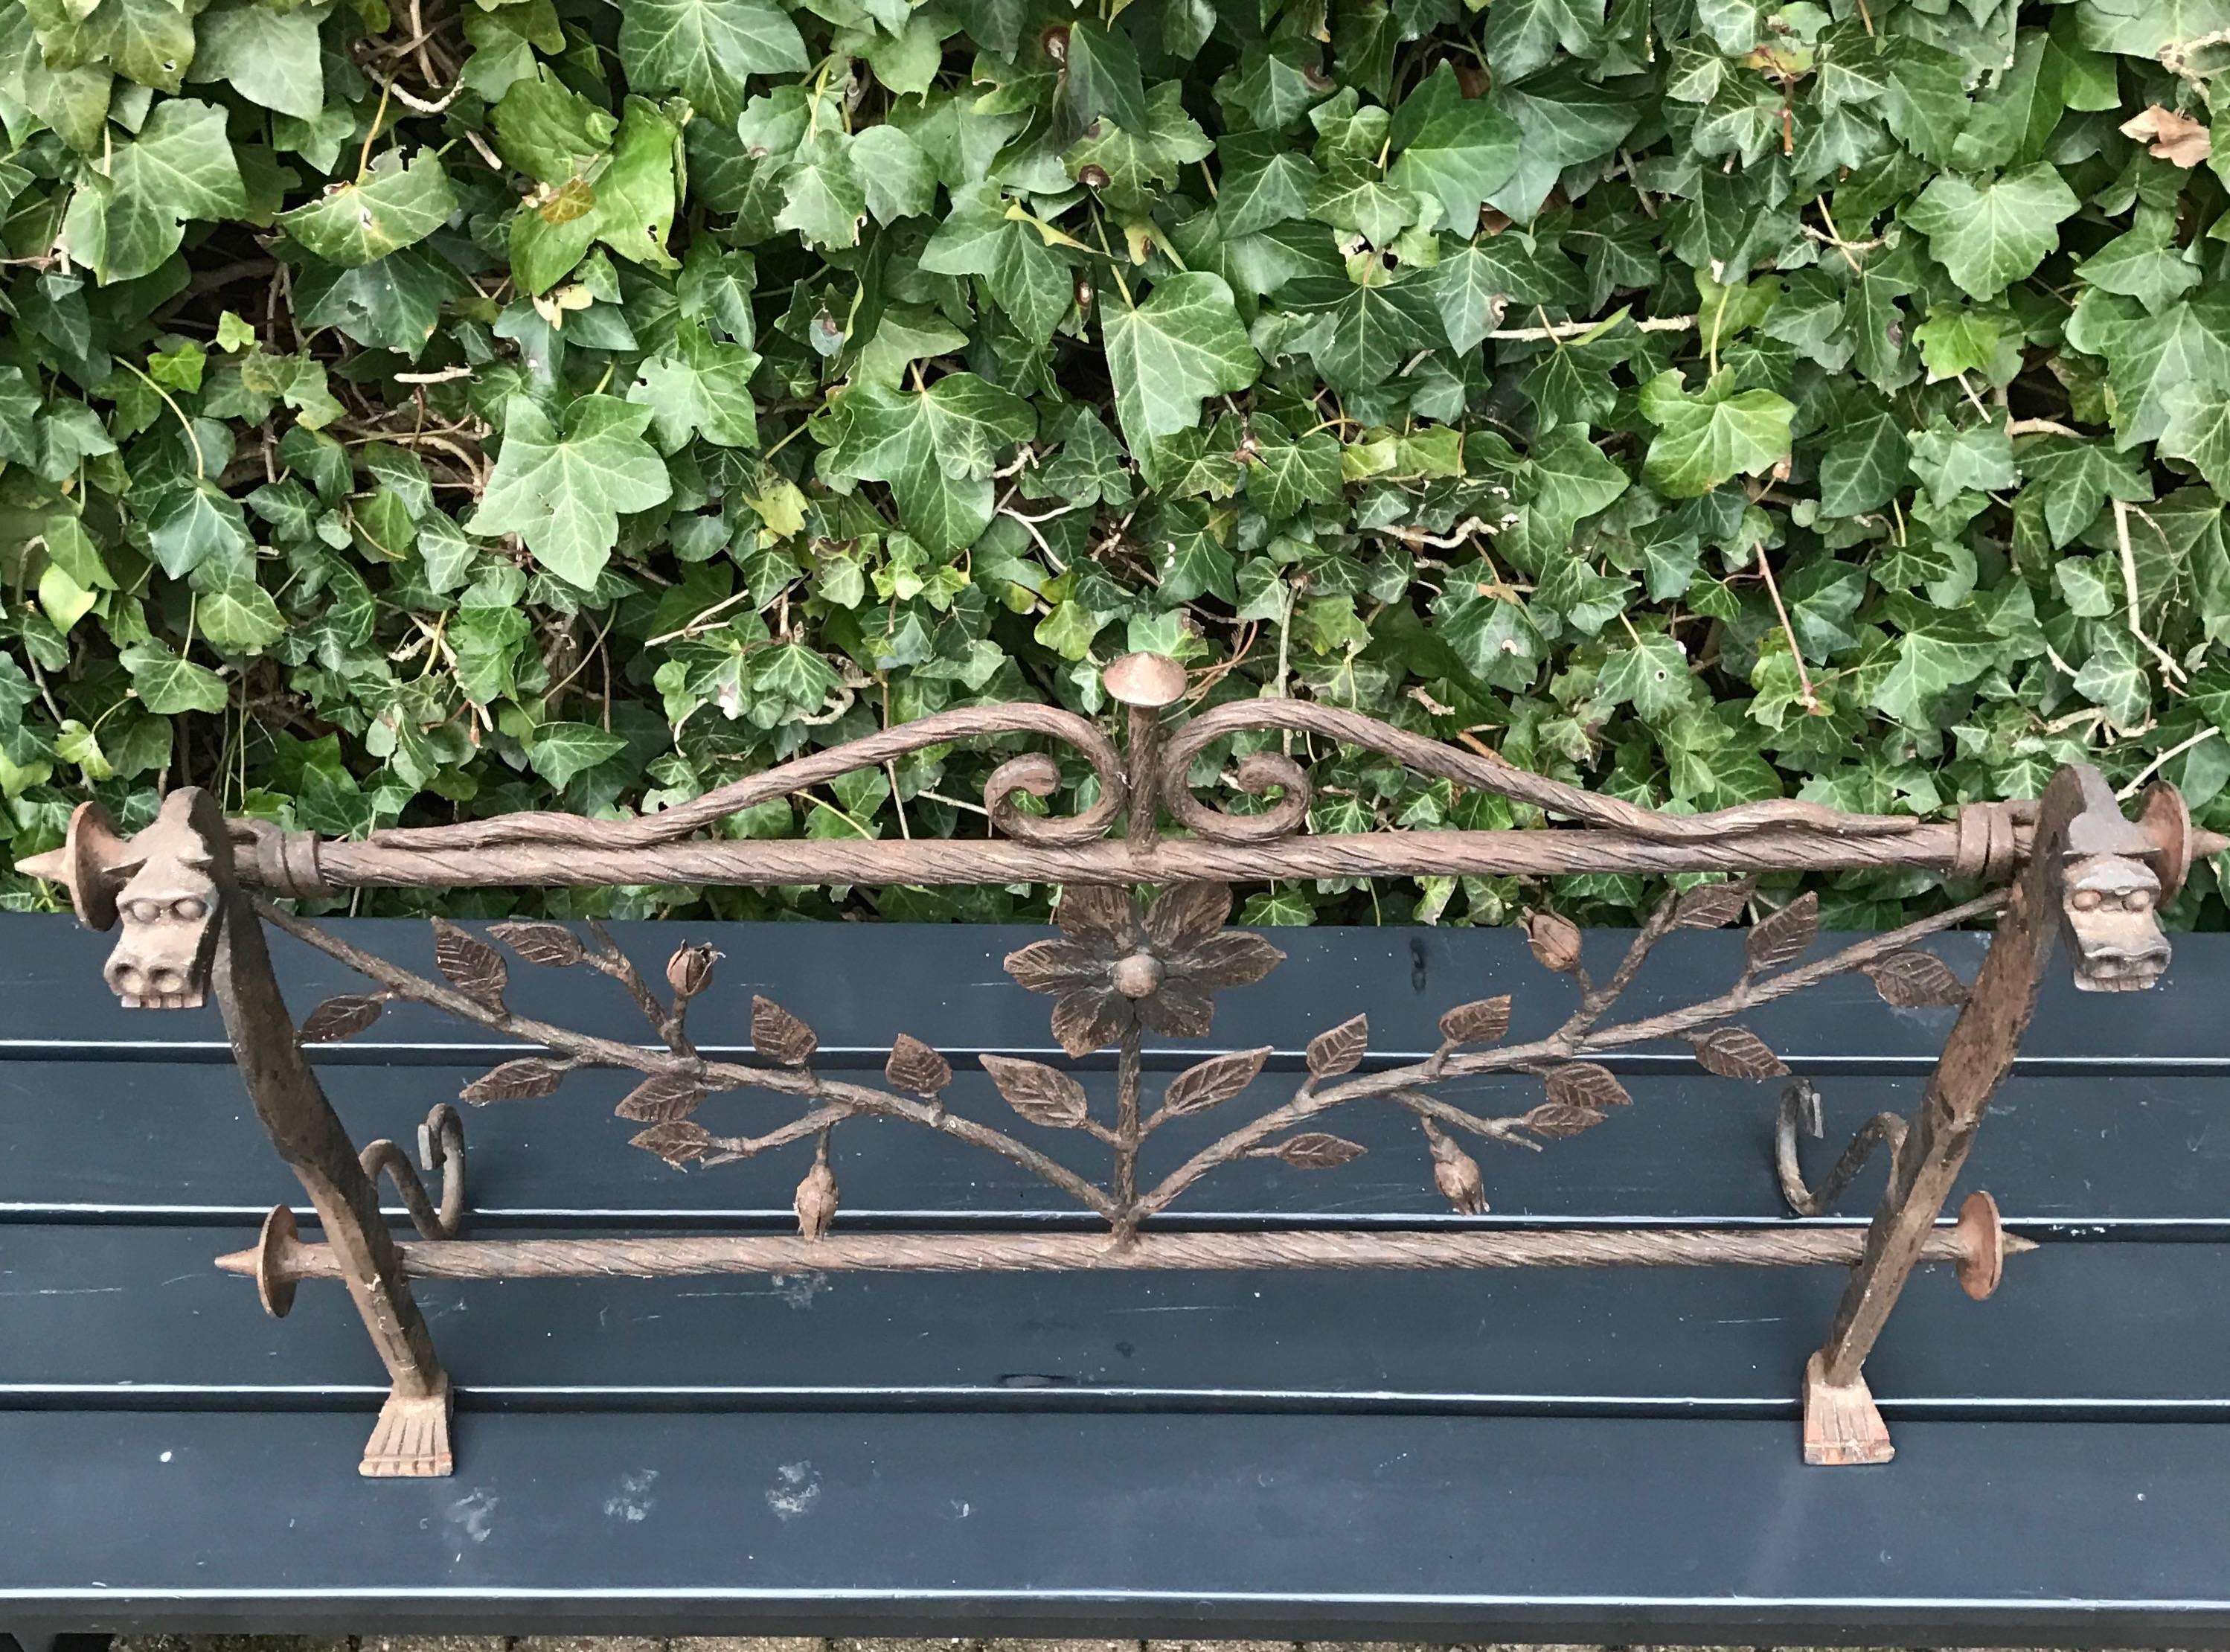 Decorative hand-forged screen with floral decor.

This artistic and handcrafted wrought iron fire screen will change the look and feel of your fireplace in an instant. The quality of the workmanship and the balance of this wrought iron artwork is